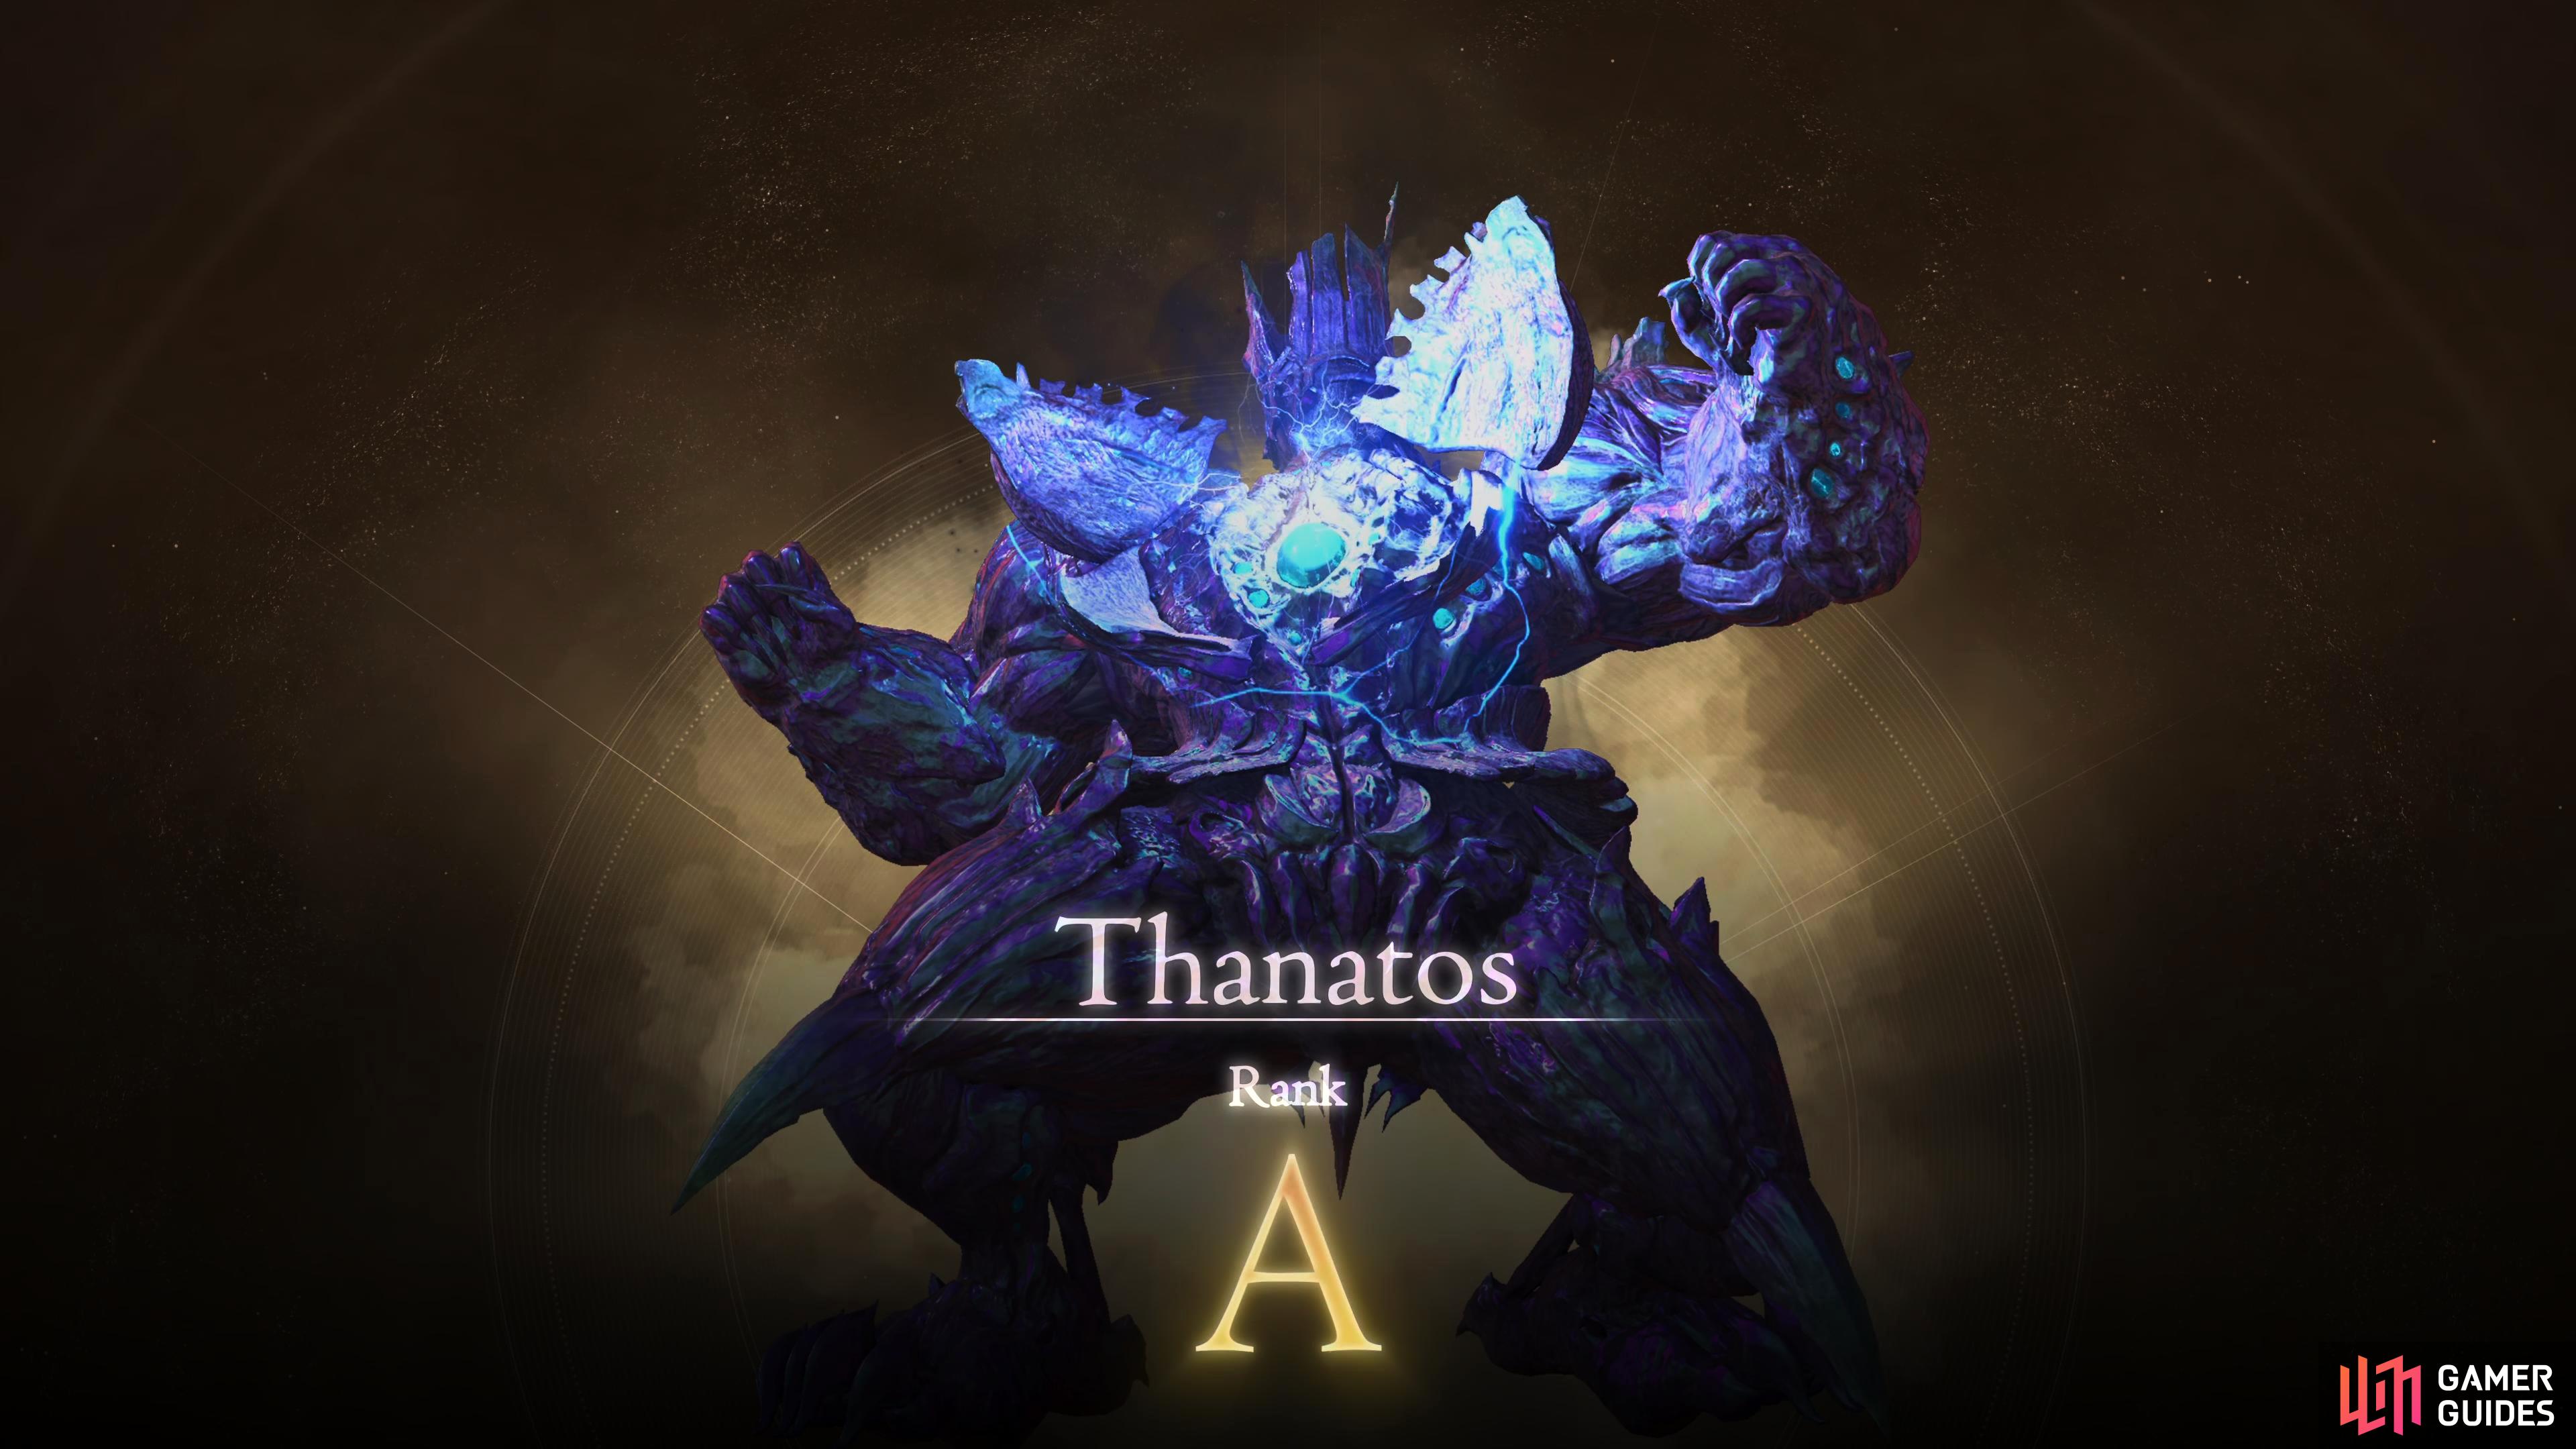 Thanatos can be accessed during the Brotherhood main scenario quest which is near the end of the game.